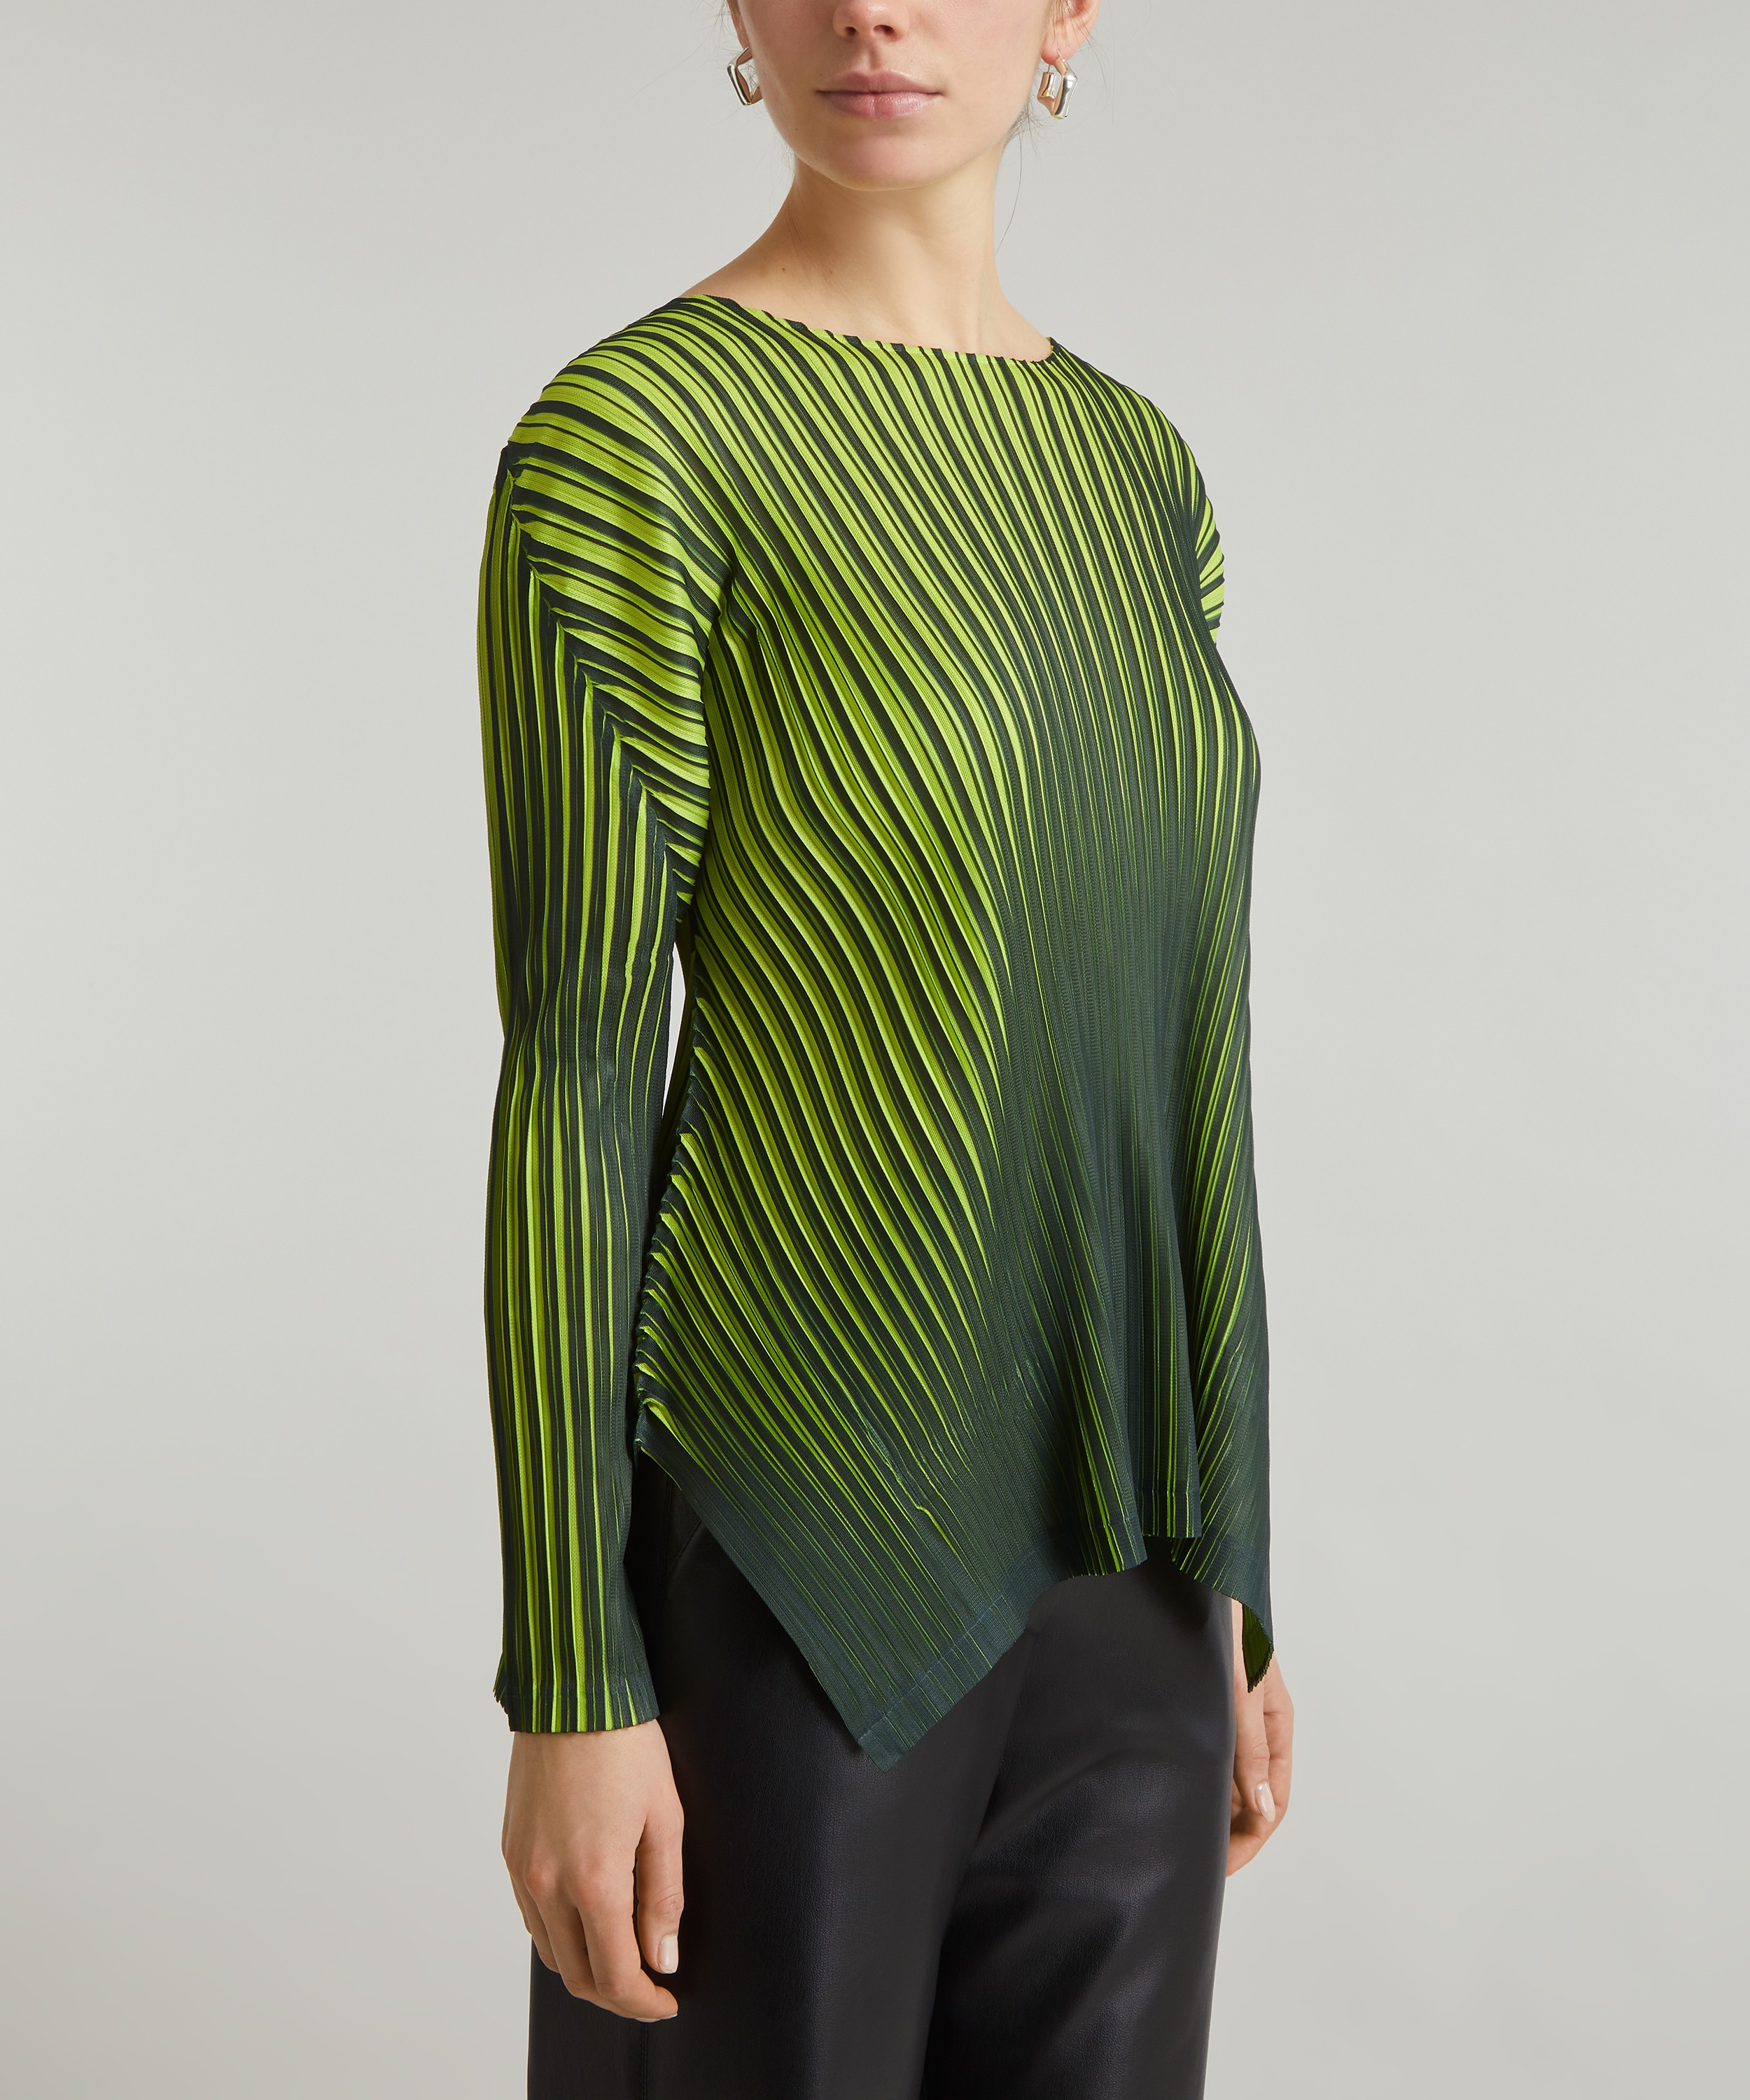 Pleats Please Issey Miyake Pleated Round-neck T-shirt in Blue